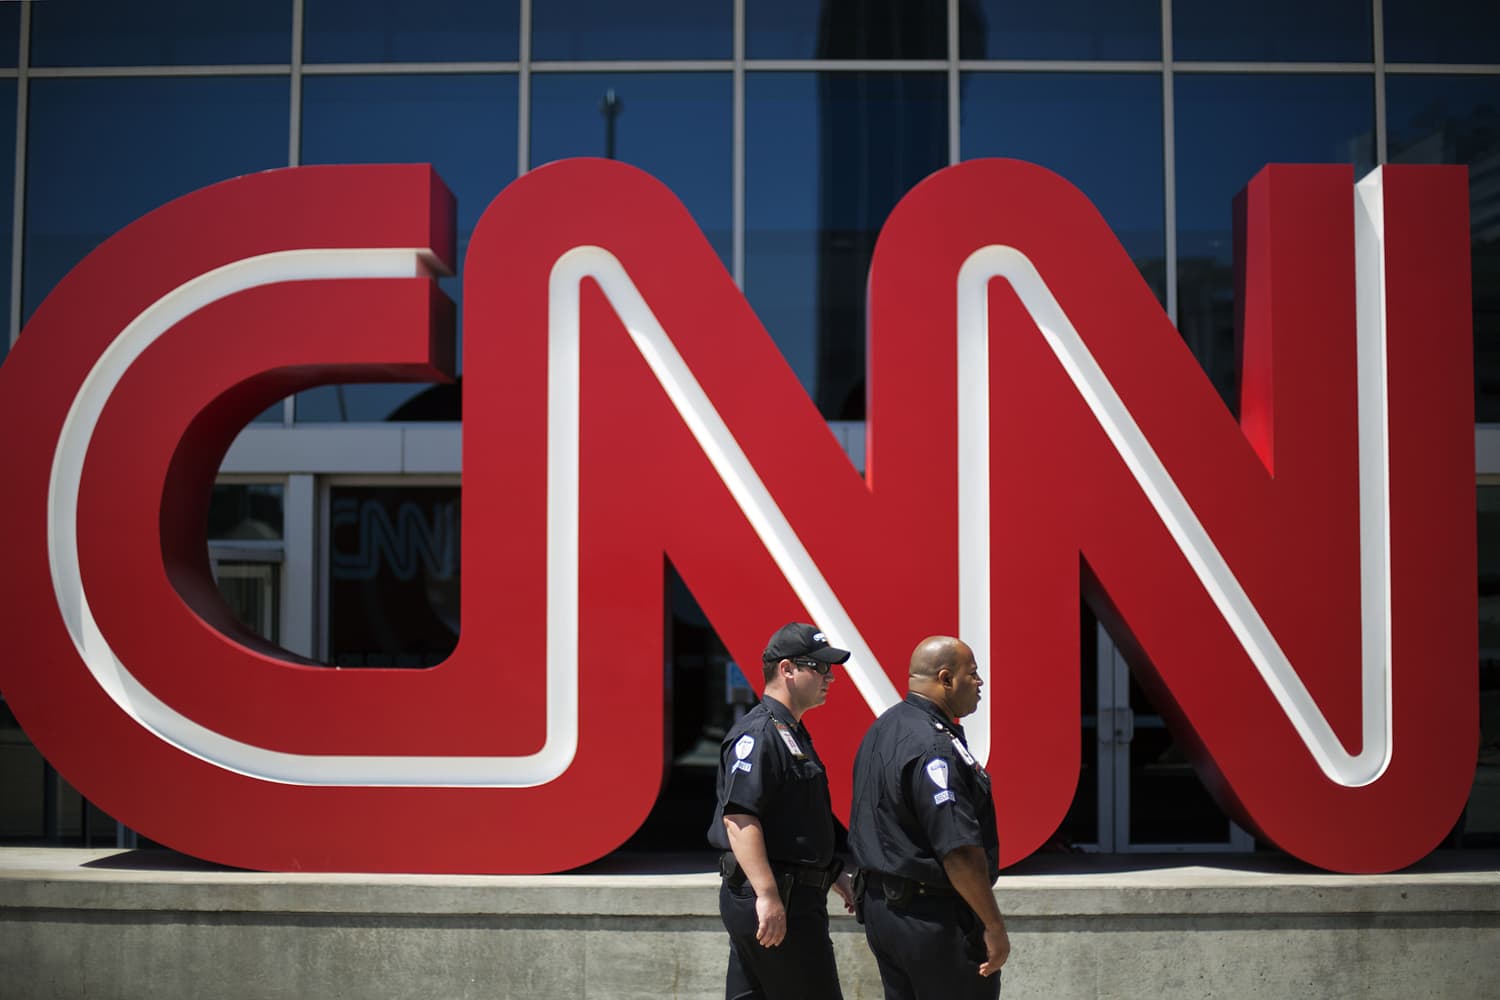 In this Aug. 26, 2014 file photo, security guards walk past the entrance to CNN headquarters in Atlanta. (David Goldman, File/AP)